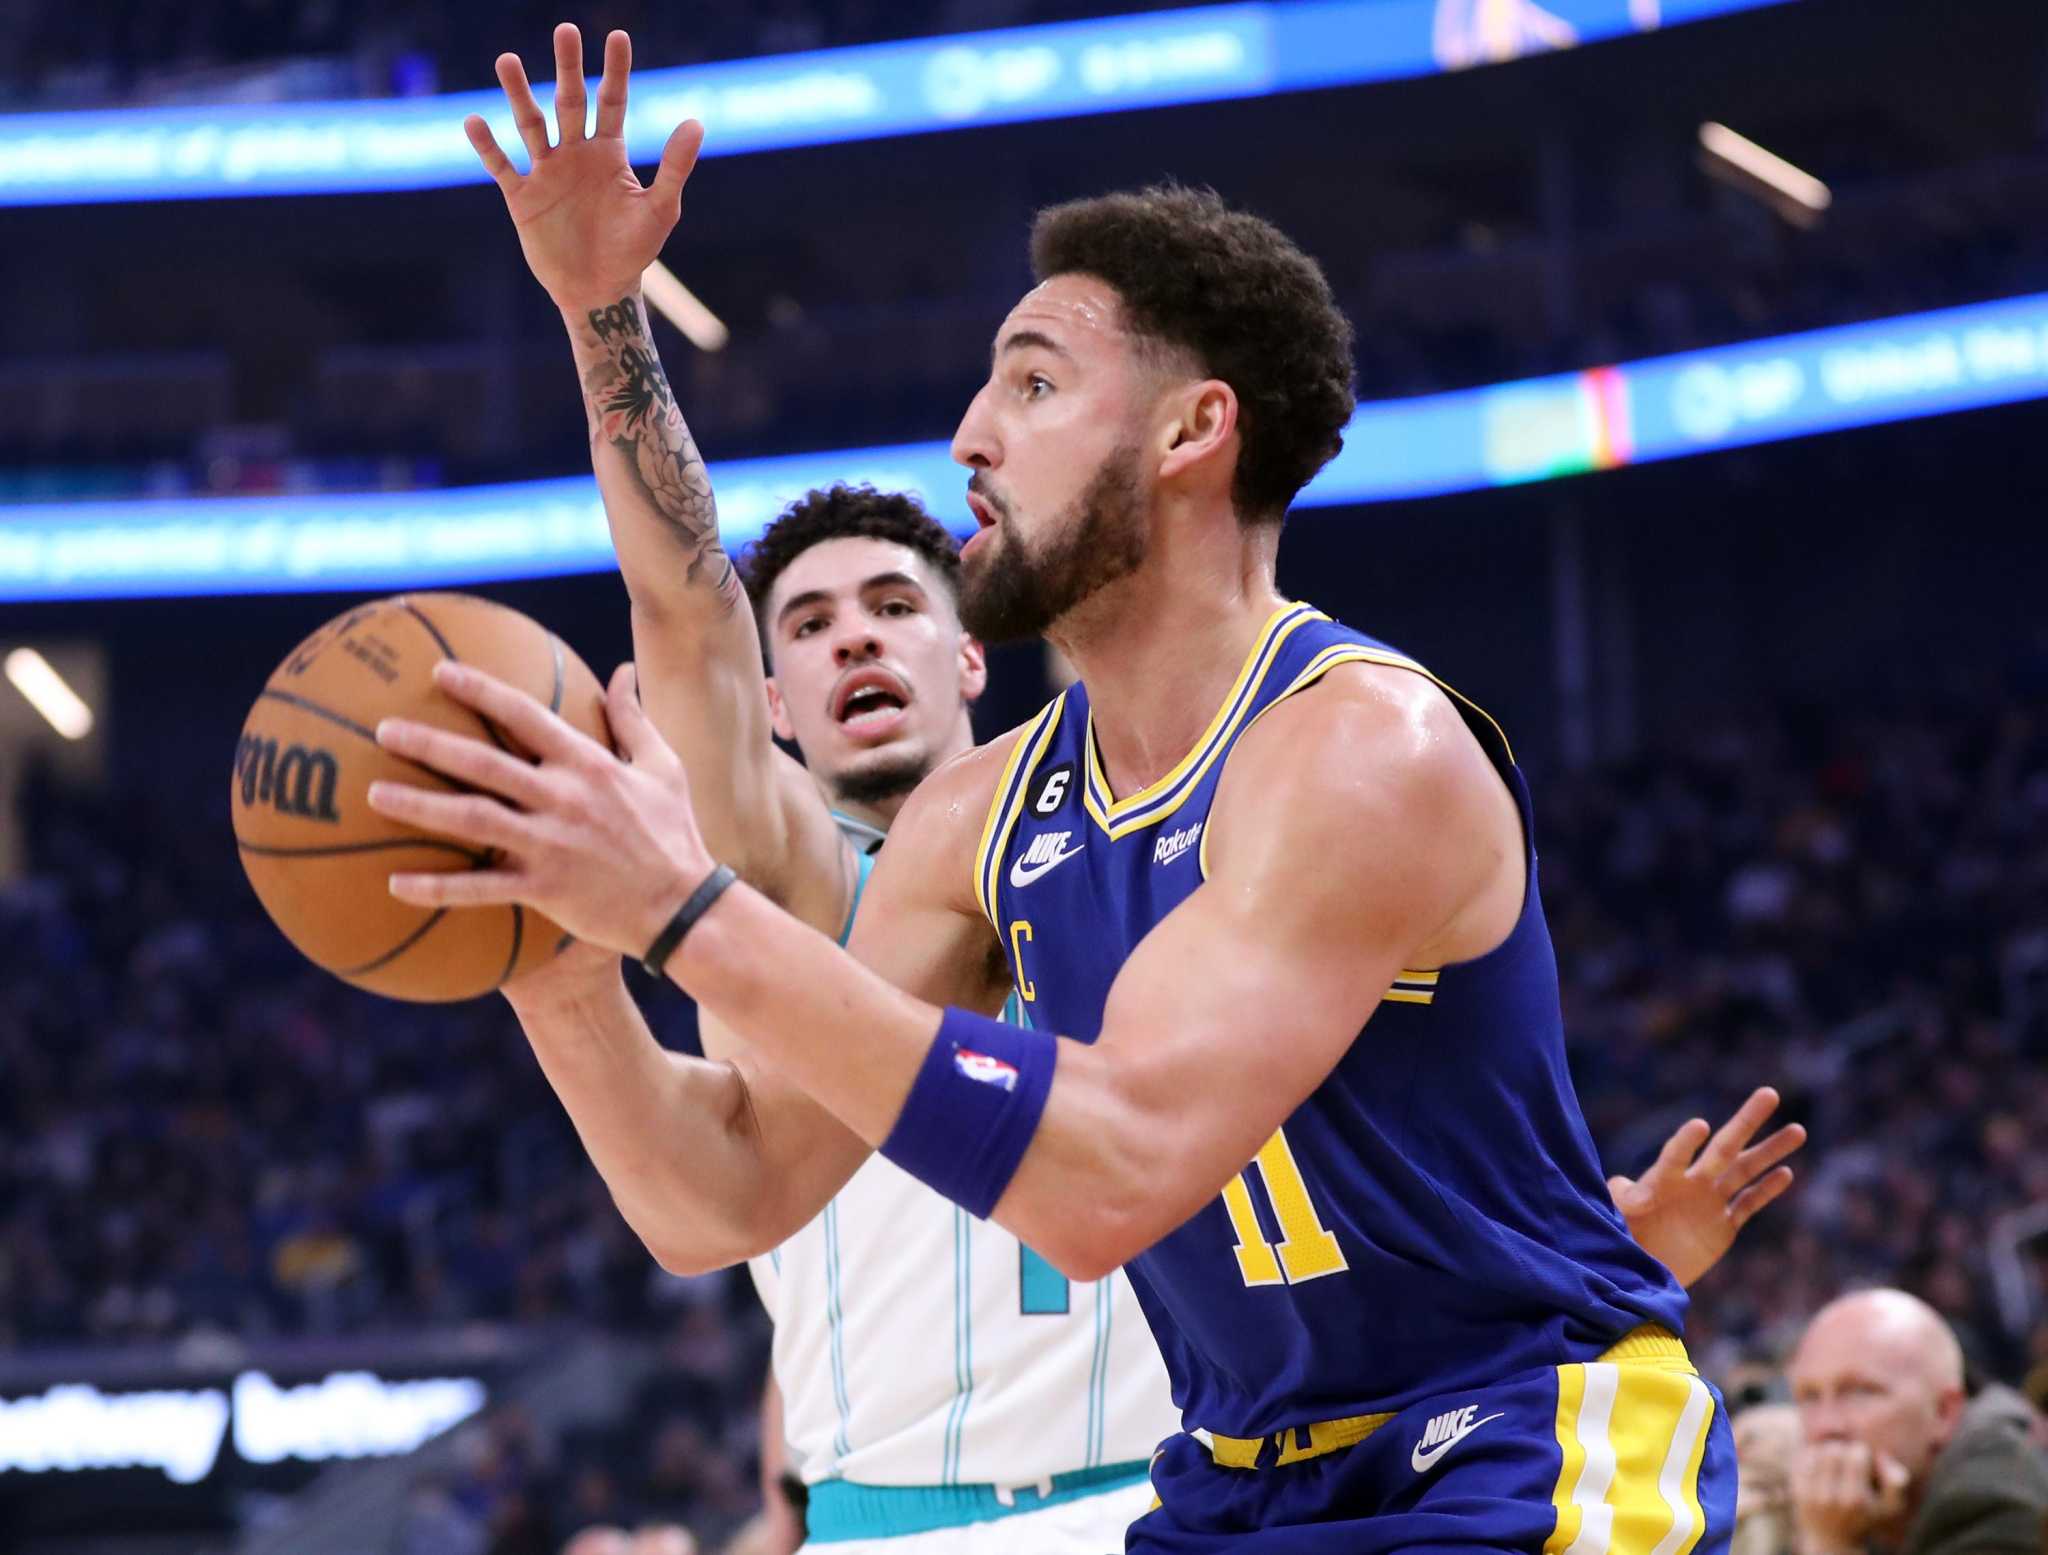 Warriors go ice cold from distance, but hold off Charlotte to win 110-105